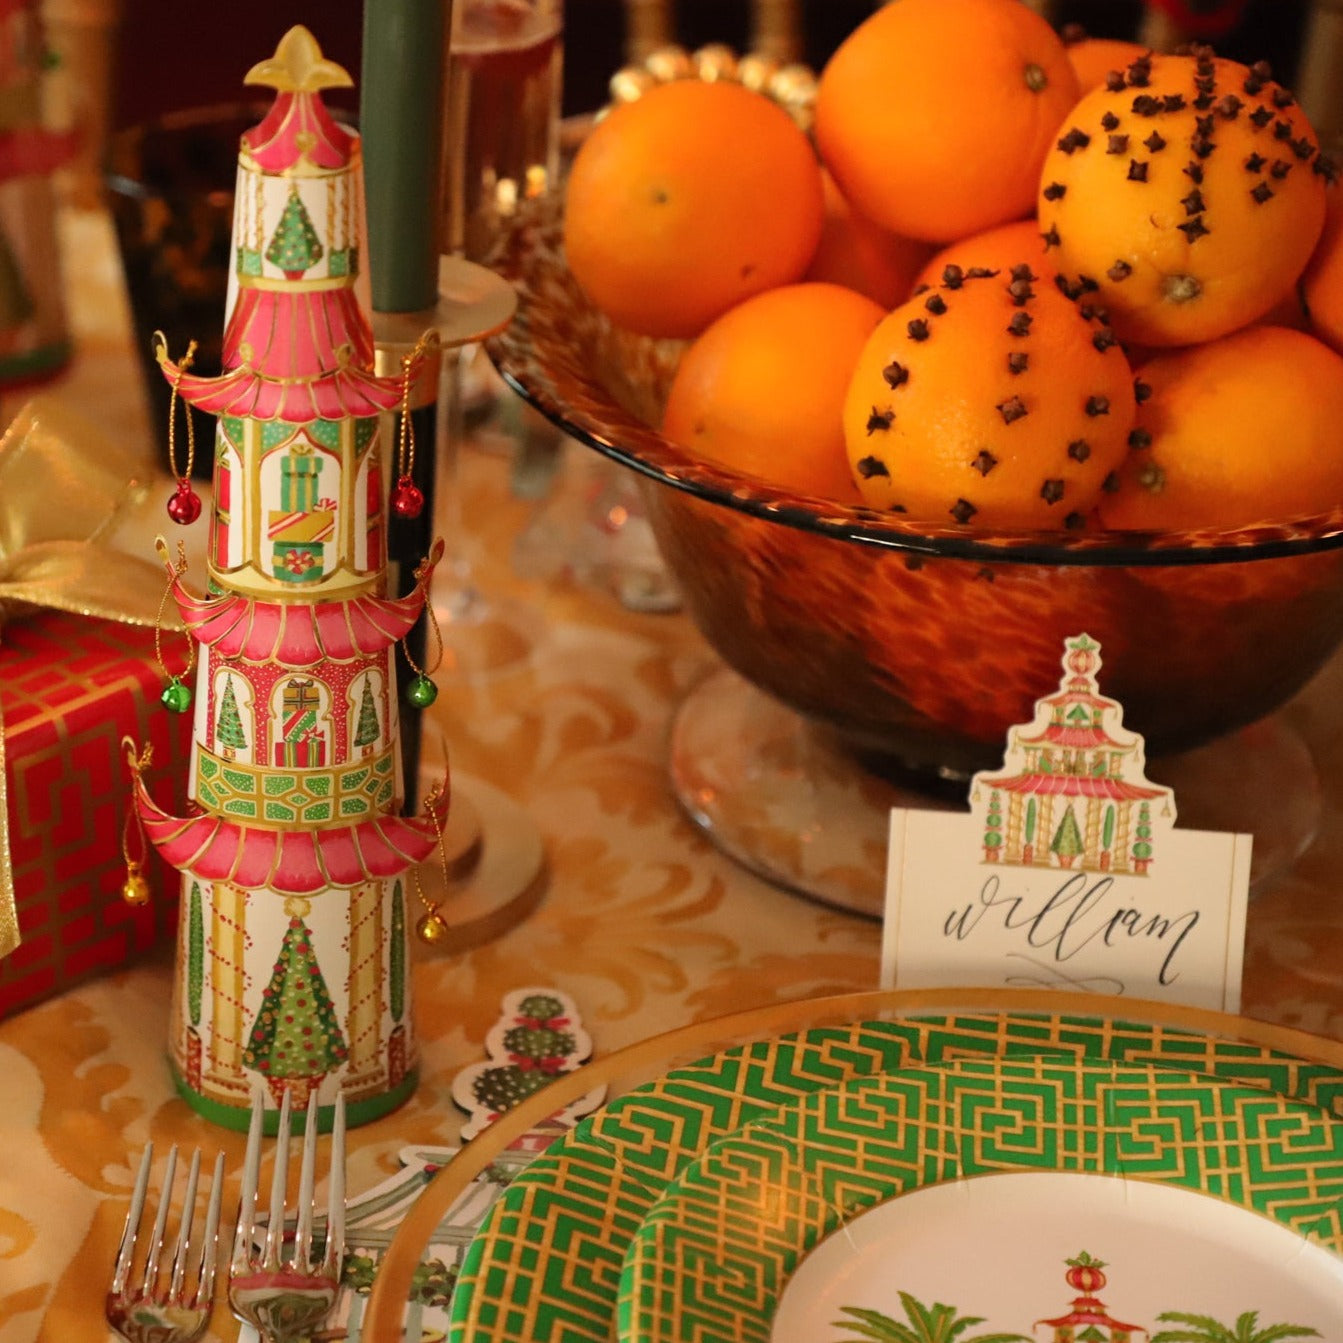 Christmas table scene showing pagoda design paper plates, place card and other Christmas table decorations